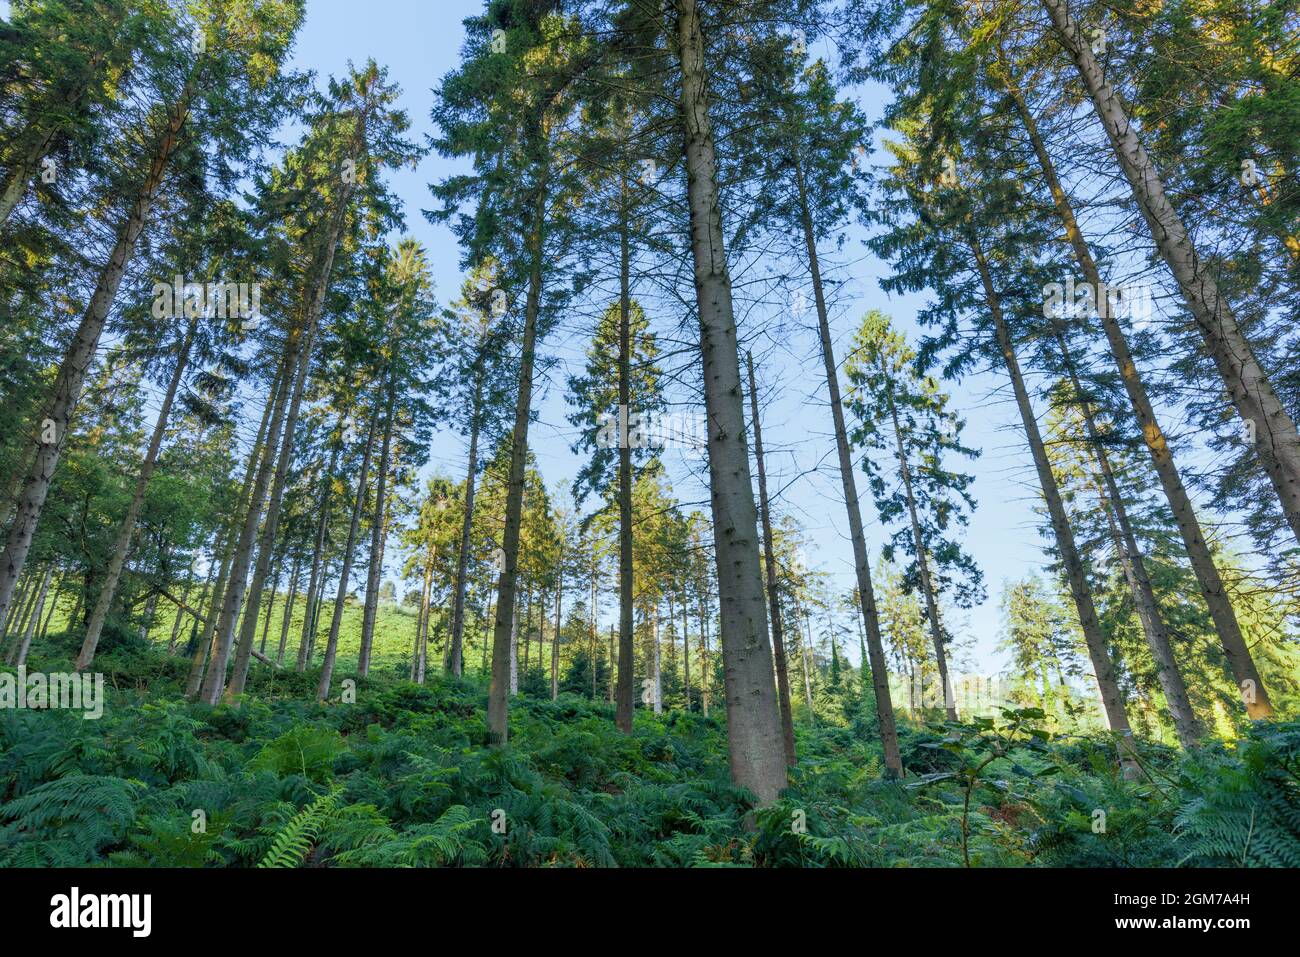 A conifer plantation at Dunster Park on the edge of the Exmoor National Park, Somerset, England. Stock Photo